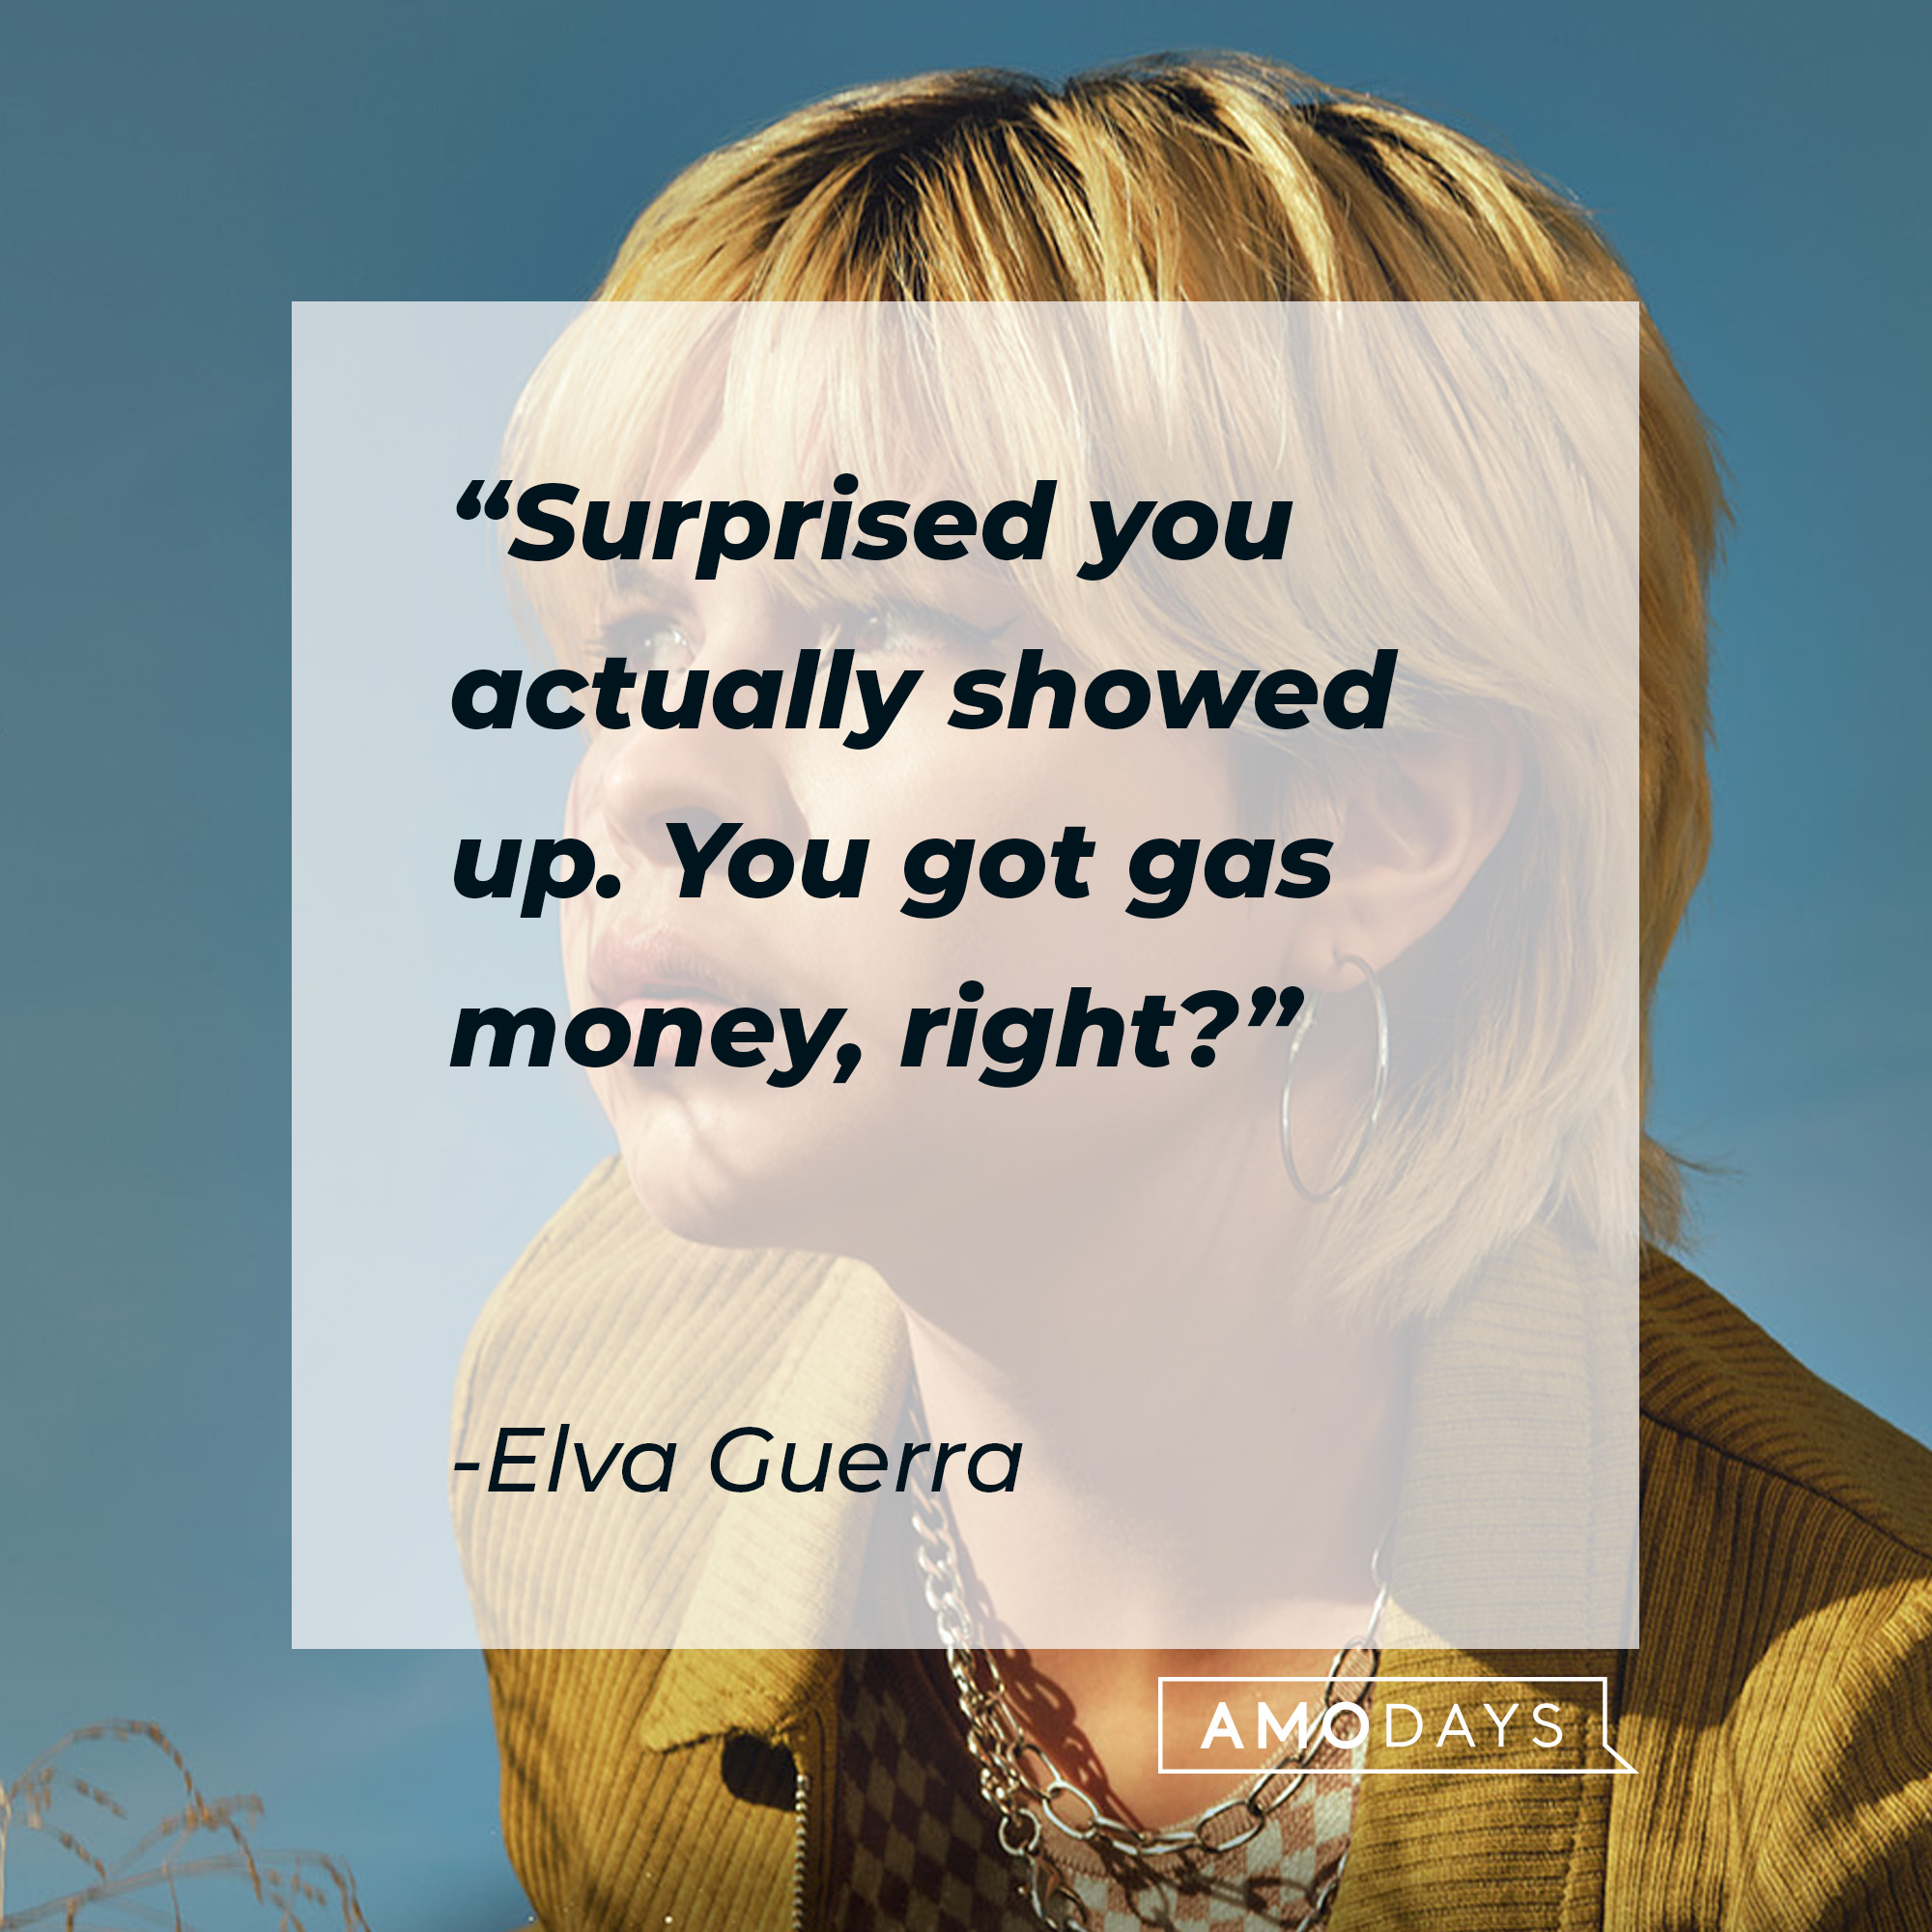 Elva Guerra, with her quote: “Surprised you actually showed up. You got gas money, right?” | Source: Facebook.com/RezDogsFX